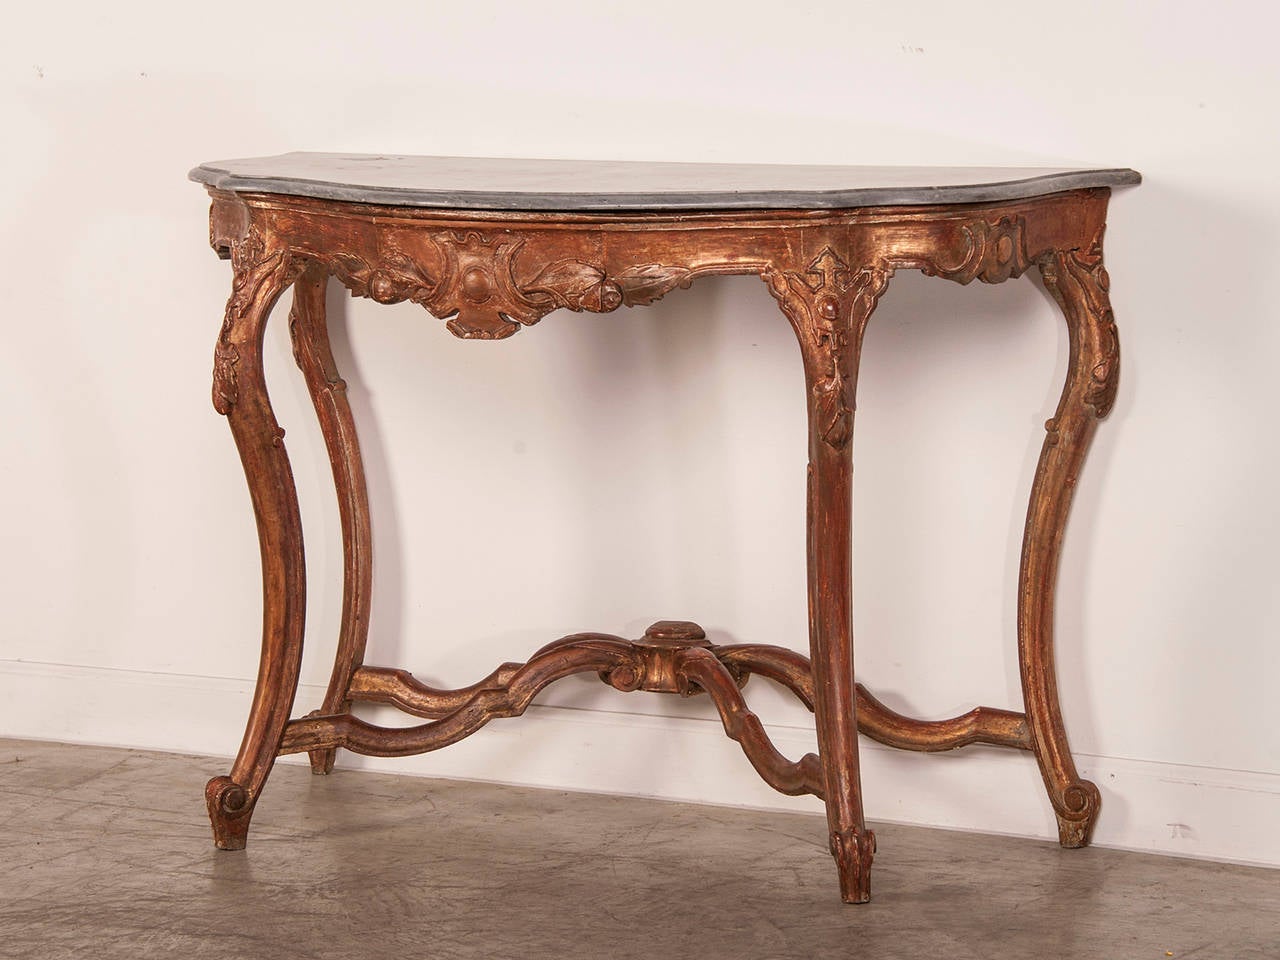 Receive our new selections direct from 1stdibs by email each week. Please click Follow Dealer below and see them first!

An antique French Louis XV style gold leaf console table circa 1810 connected with stretchers and having the original grey